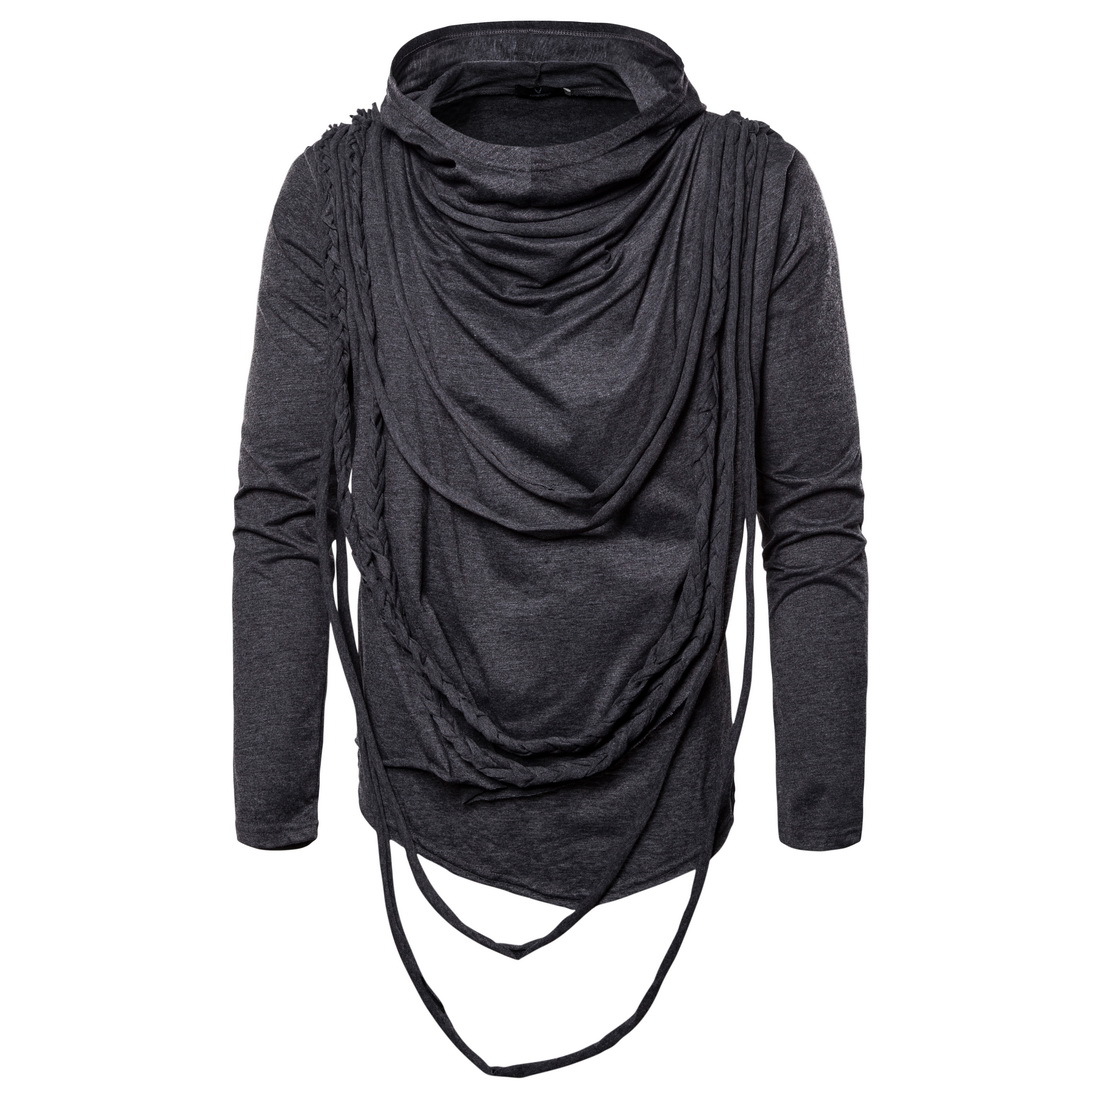  New Fashion Spring Autumn Winter Clothing Trend Long-sleeved Pullovers Men T Shirt Tops dary gray